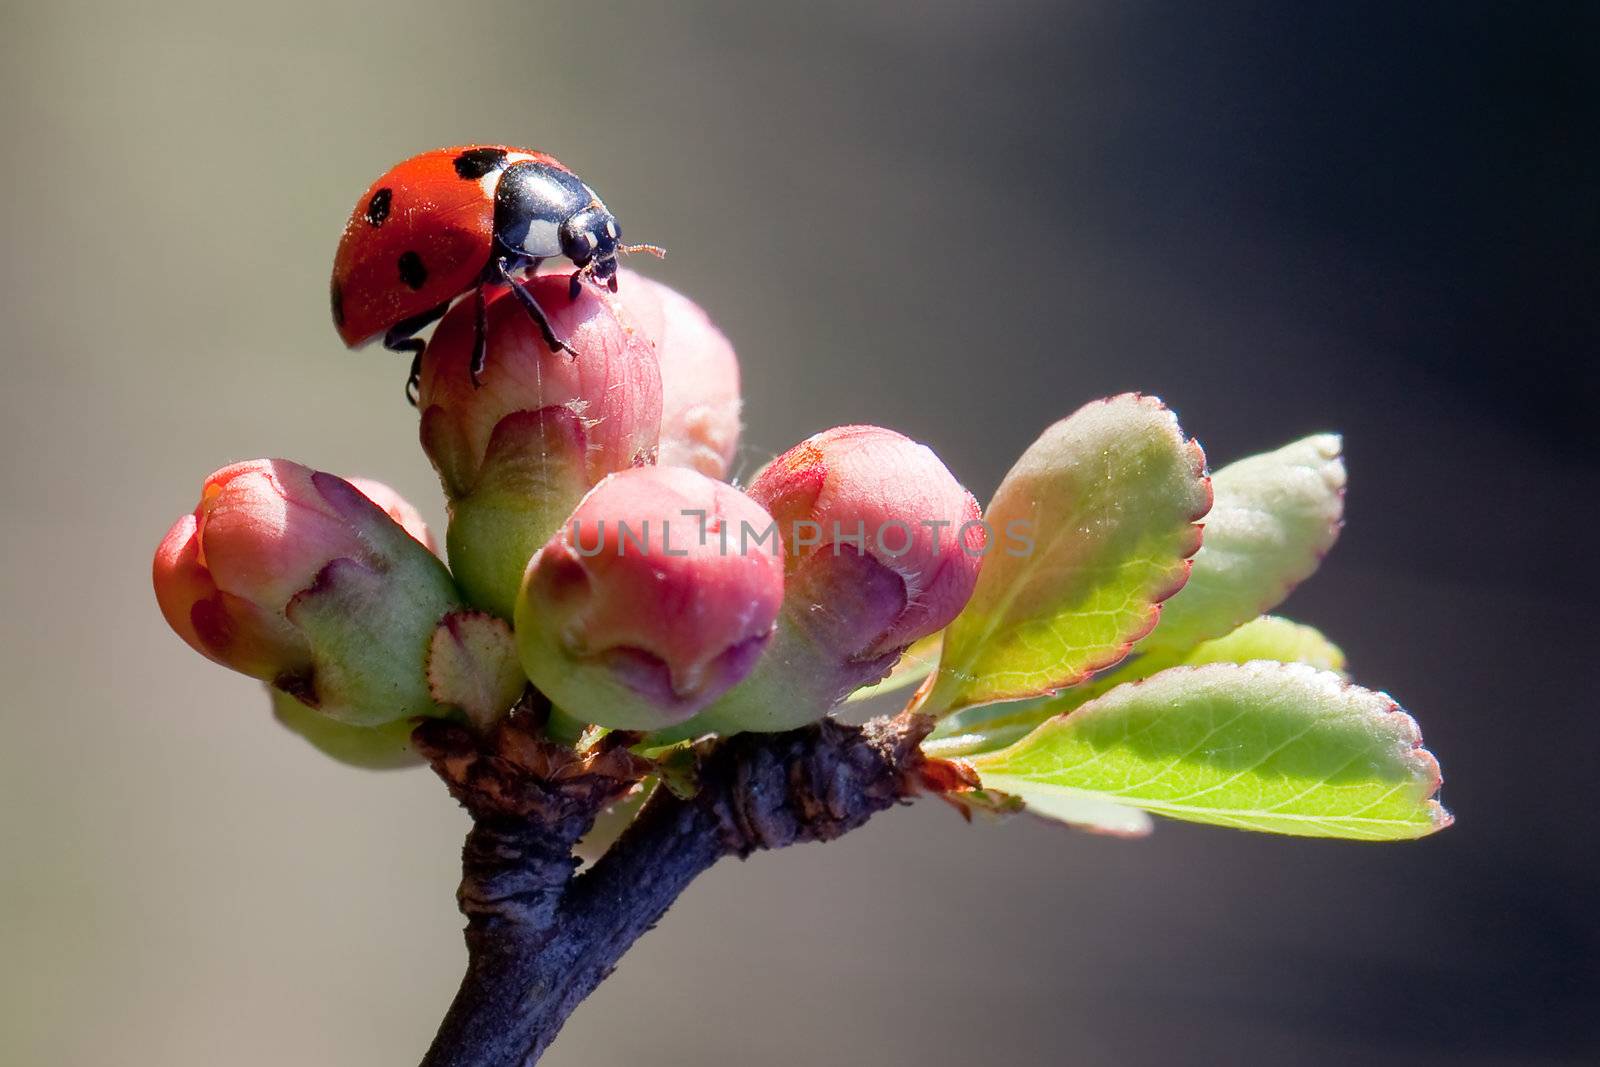 Ladybird early morning on a spring blossom